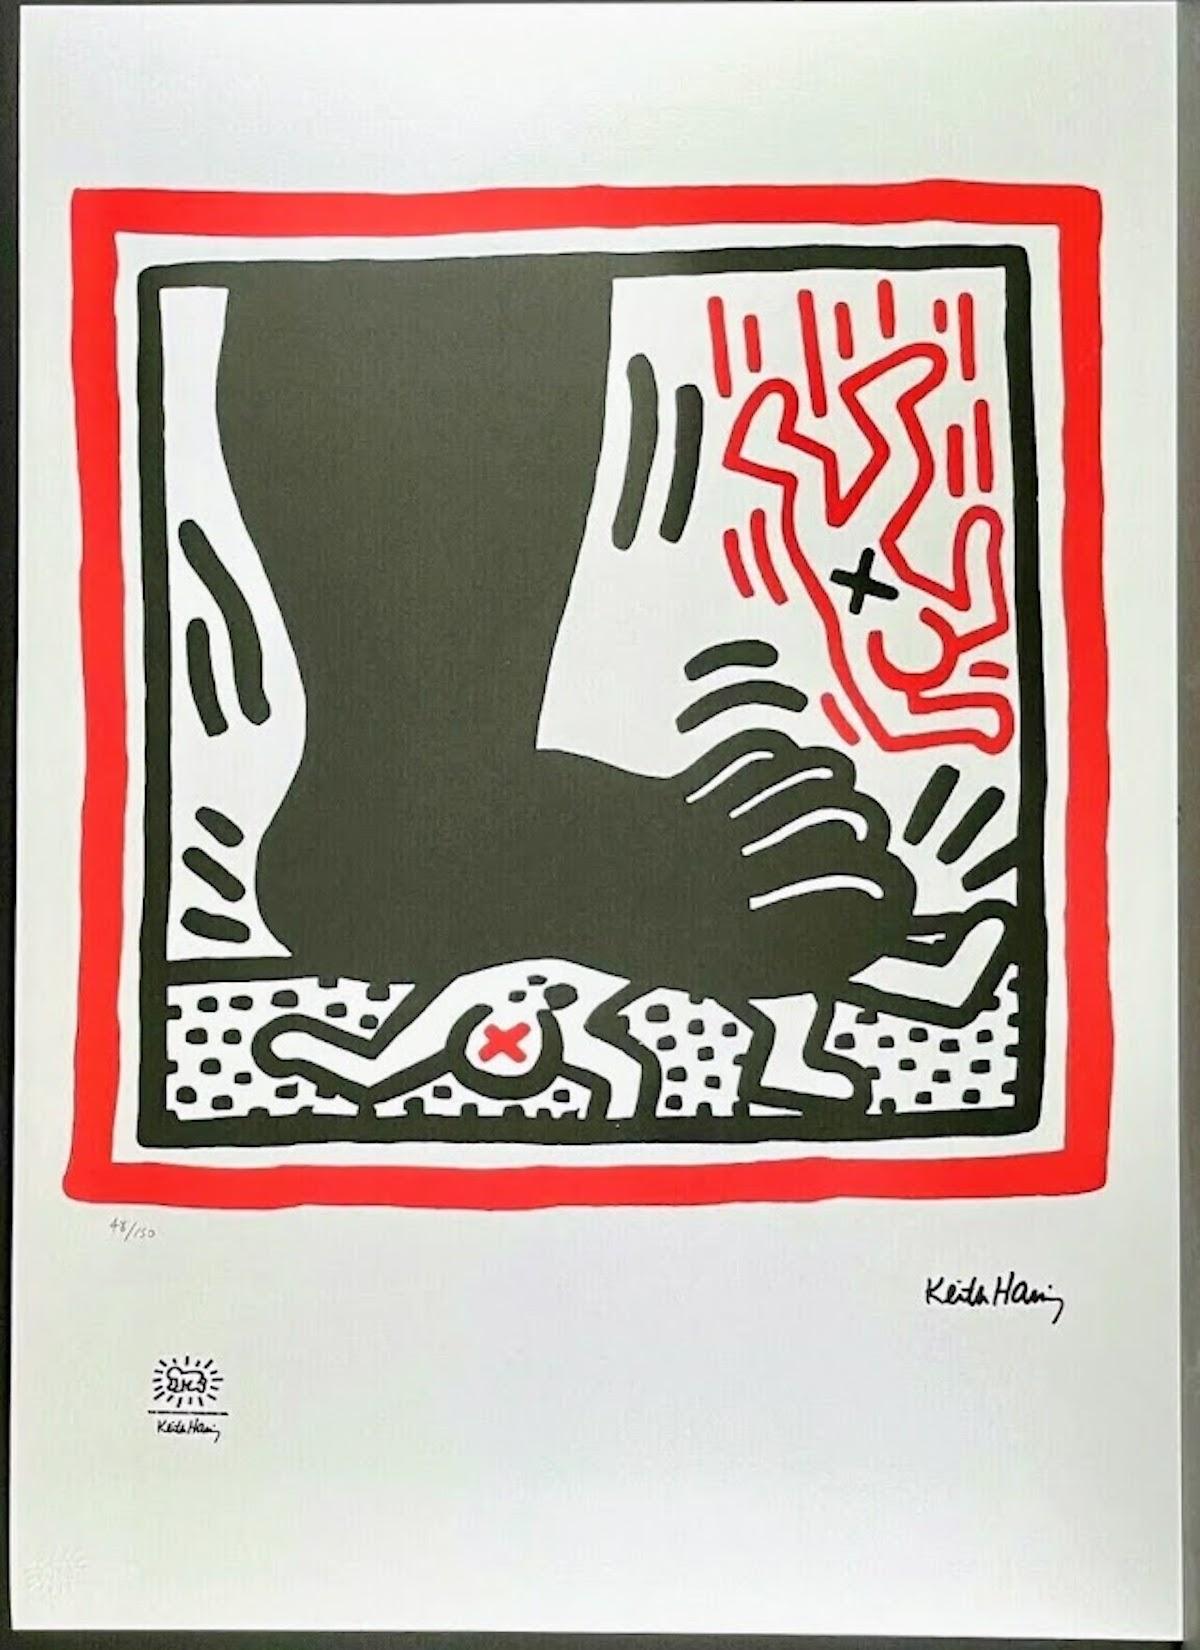 (after) Keith Haring Print - Free South Africa, Keith Haring Foundation Lithograph, Numbered /150